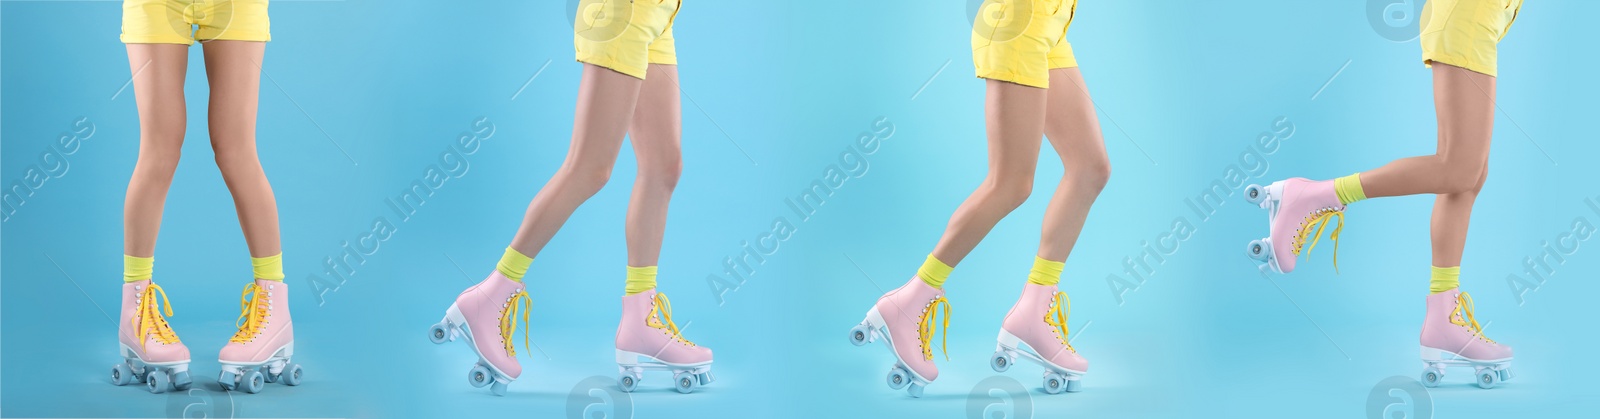 Image of Photos of woman with retro roller skates on light blue background, closeup. Collage banner design